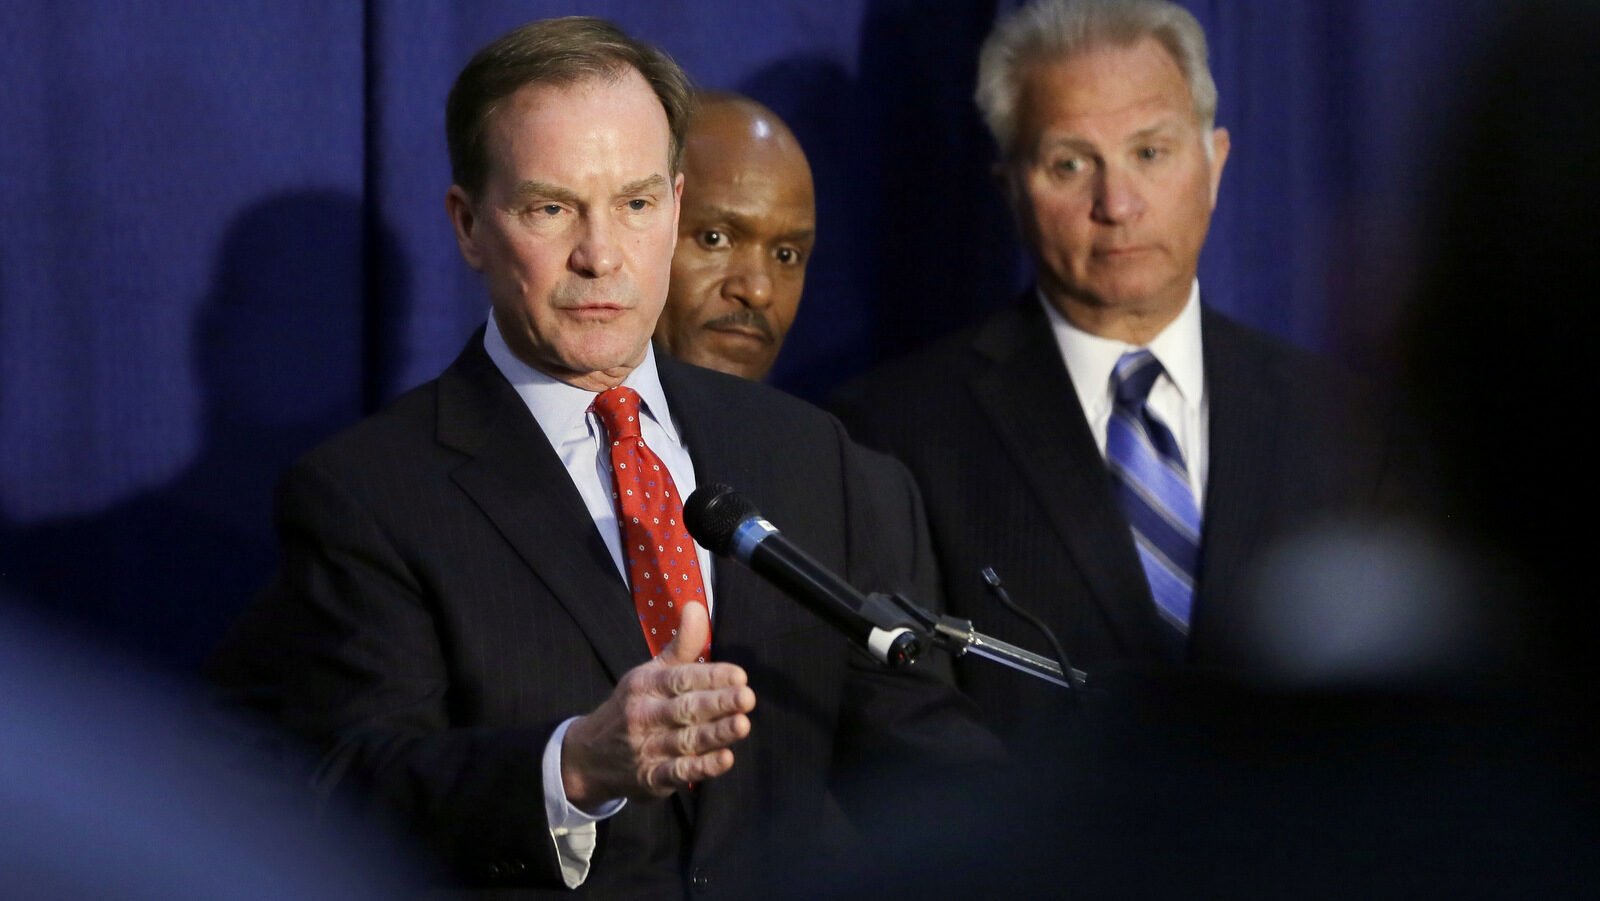 Michigan Attorney General Bill Schuette addresses the media, Wednesday, April 20, 2016, in Flint, Mich. Months after officials conceded that a series of bad decisions had caused a disaster, charges were filed against a pair of state Department of Environmental Quality employees and a local water treatment supervisor and stem from an investigation by the office of the attorney general. (AP Photo/Carlos Osorio)